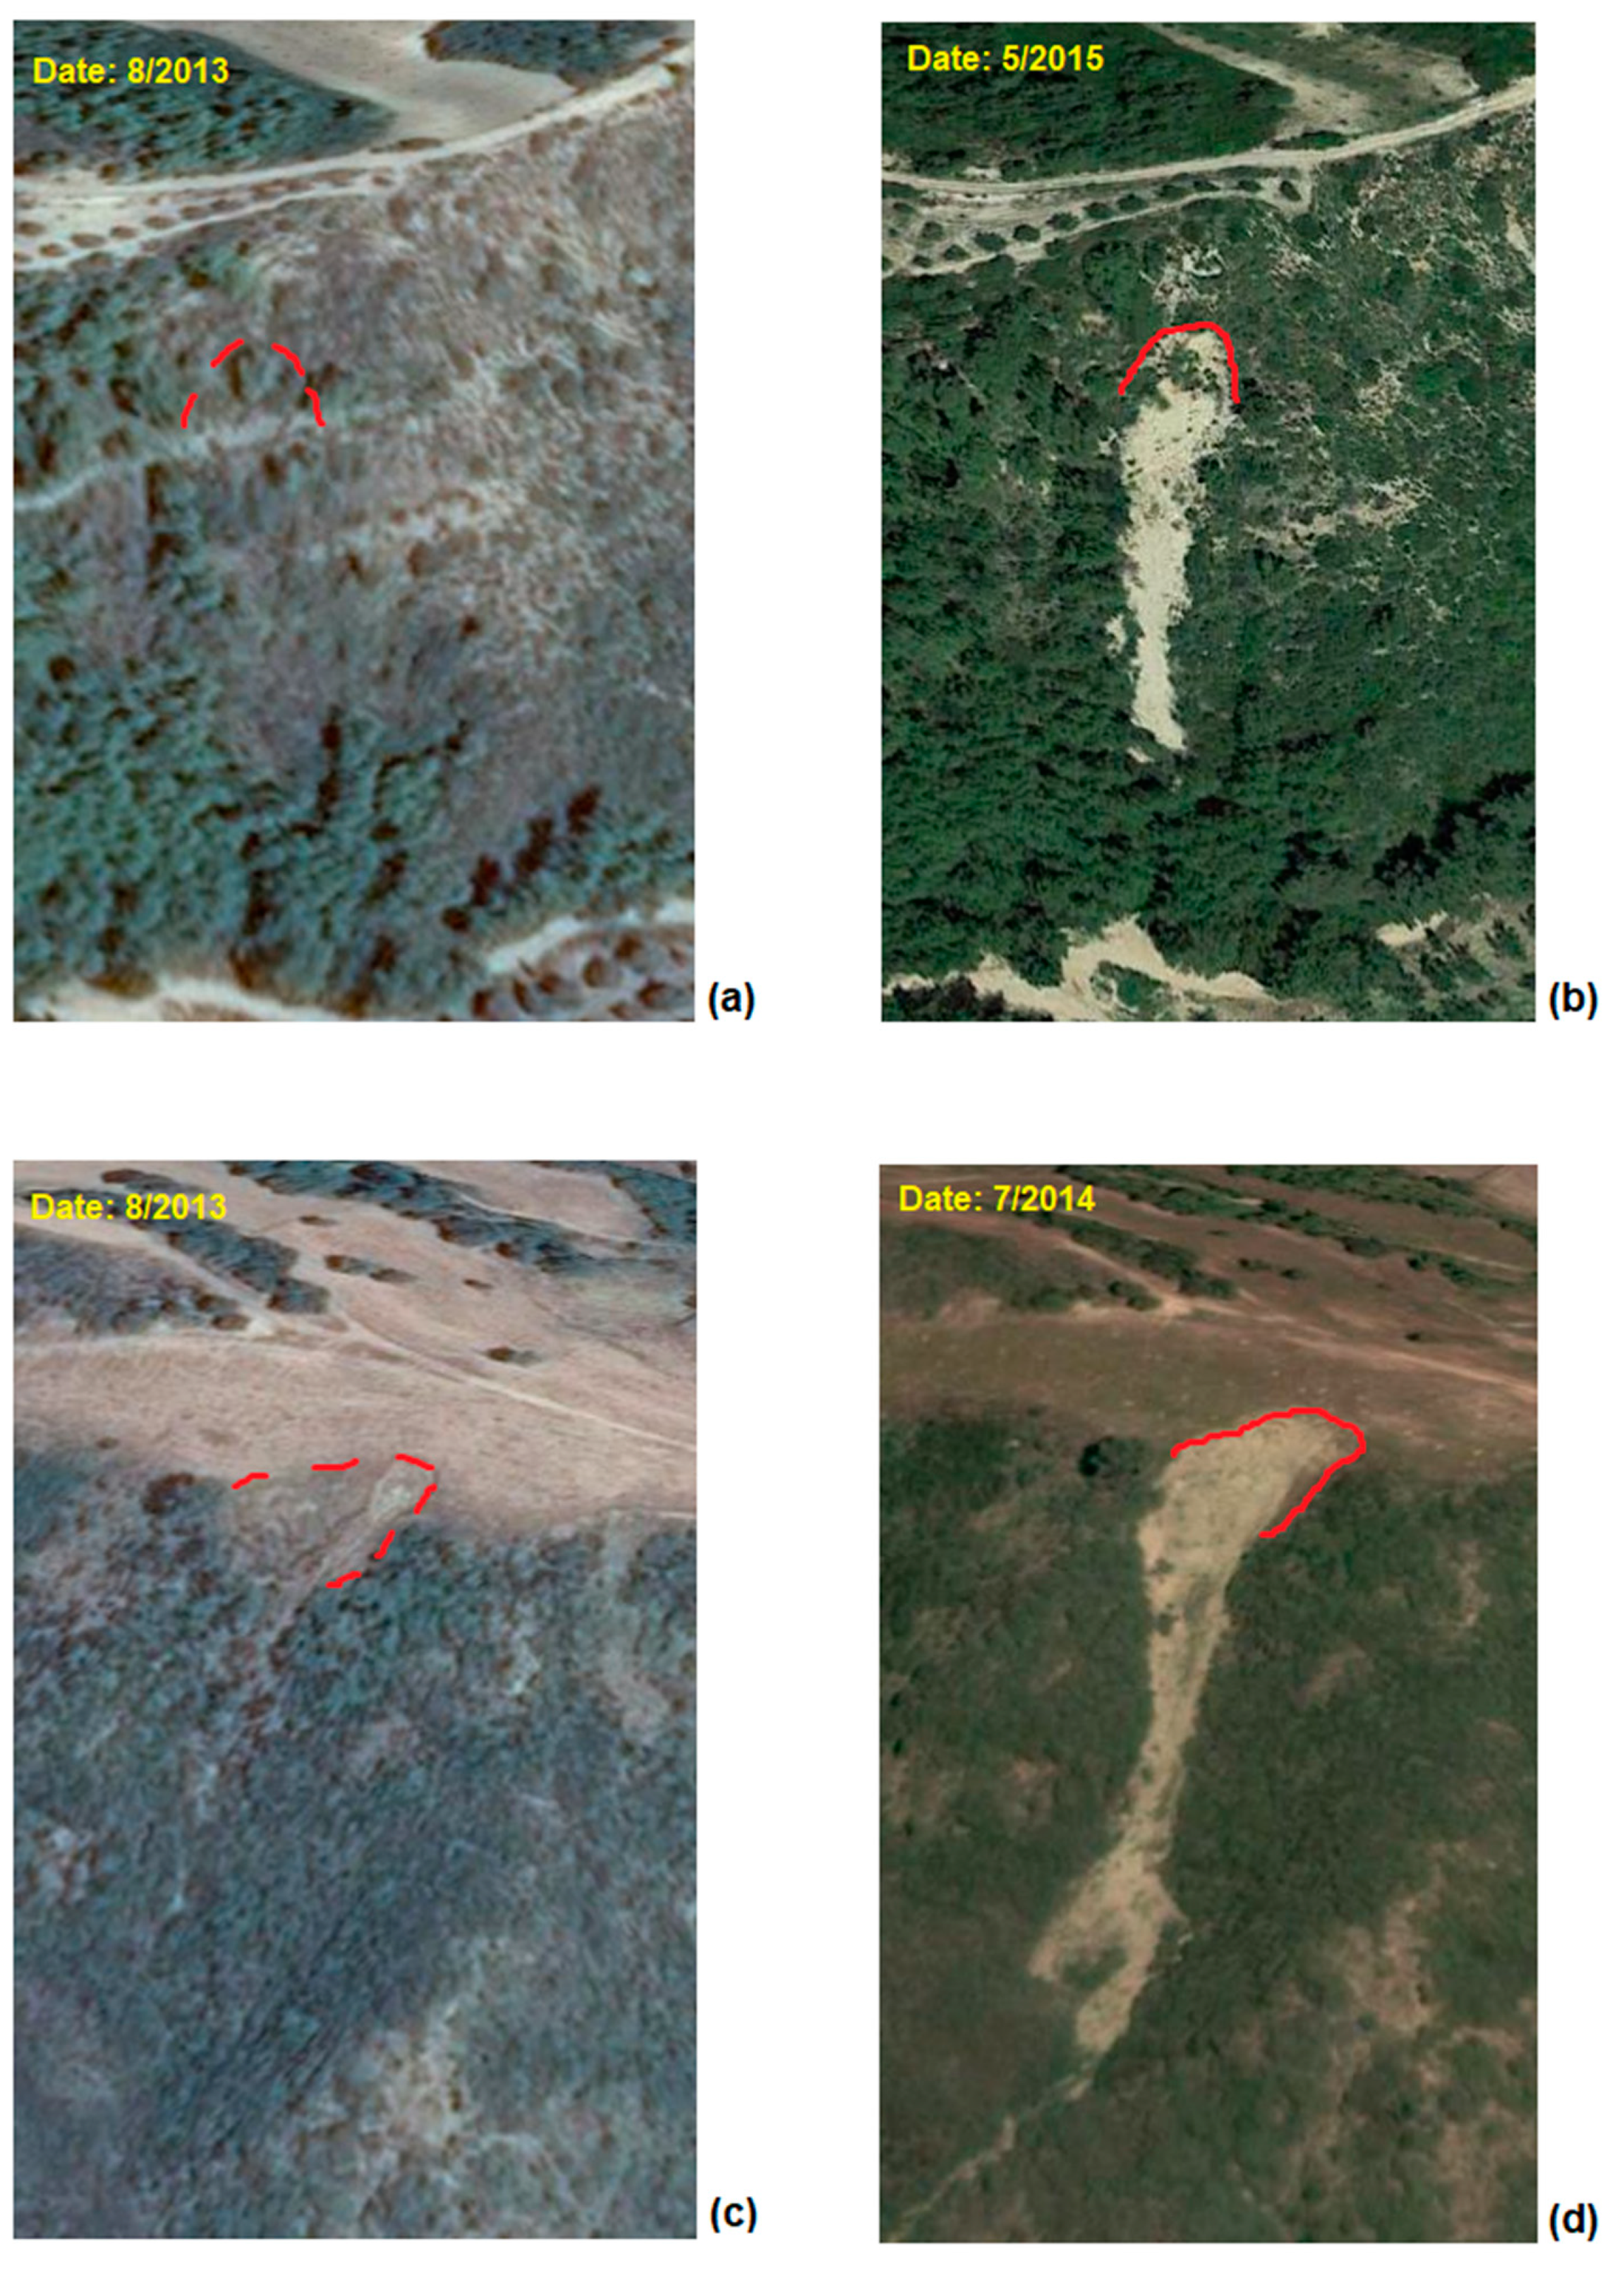 Land | Free Full-Text | Integrating Multivariate (GeoDetector) and  Bivariate (IV) Statistics for Hybrid Landslide Susceptibility Modeling: A  Case of the Vicinity of Pinios Artificial Lake, Ilia, Greece | HTML